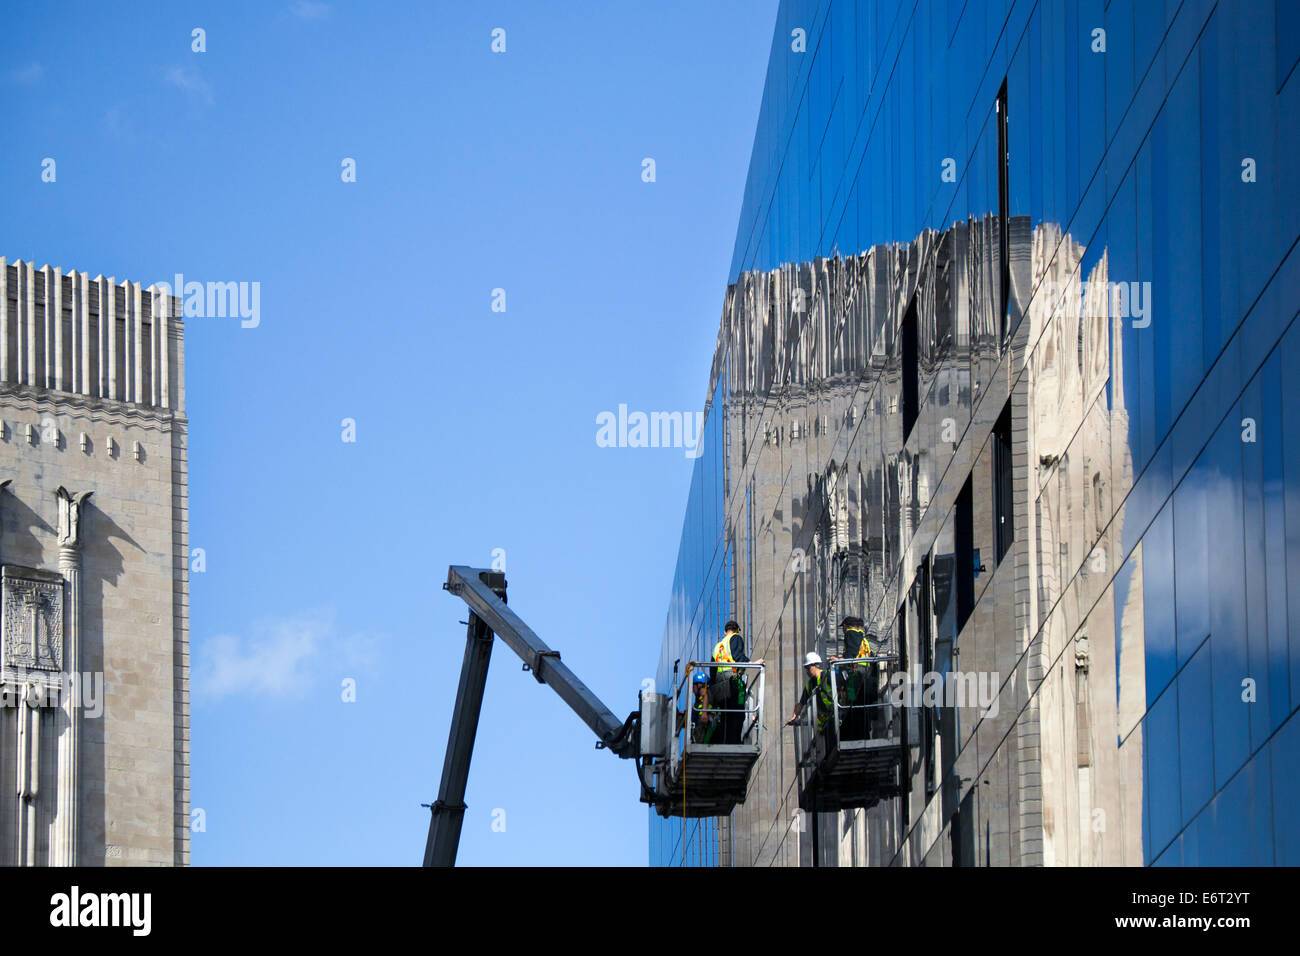 High-Rise window cleaning, using 'Sky king' Wymac elevant 450 on Mann Island, with landmark building reflections,  Liverpool, UK. Stock Photo